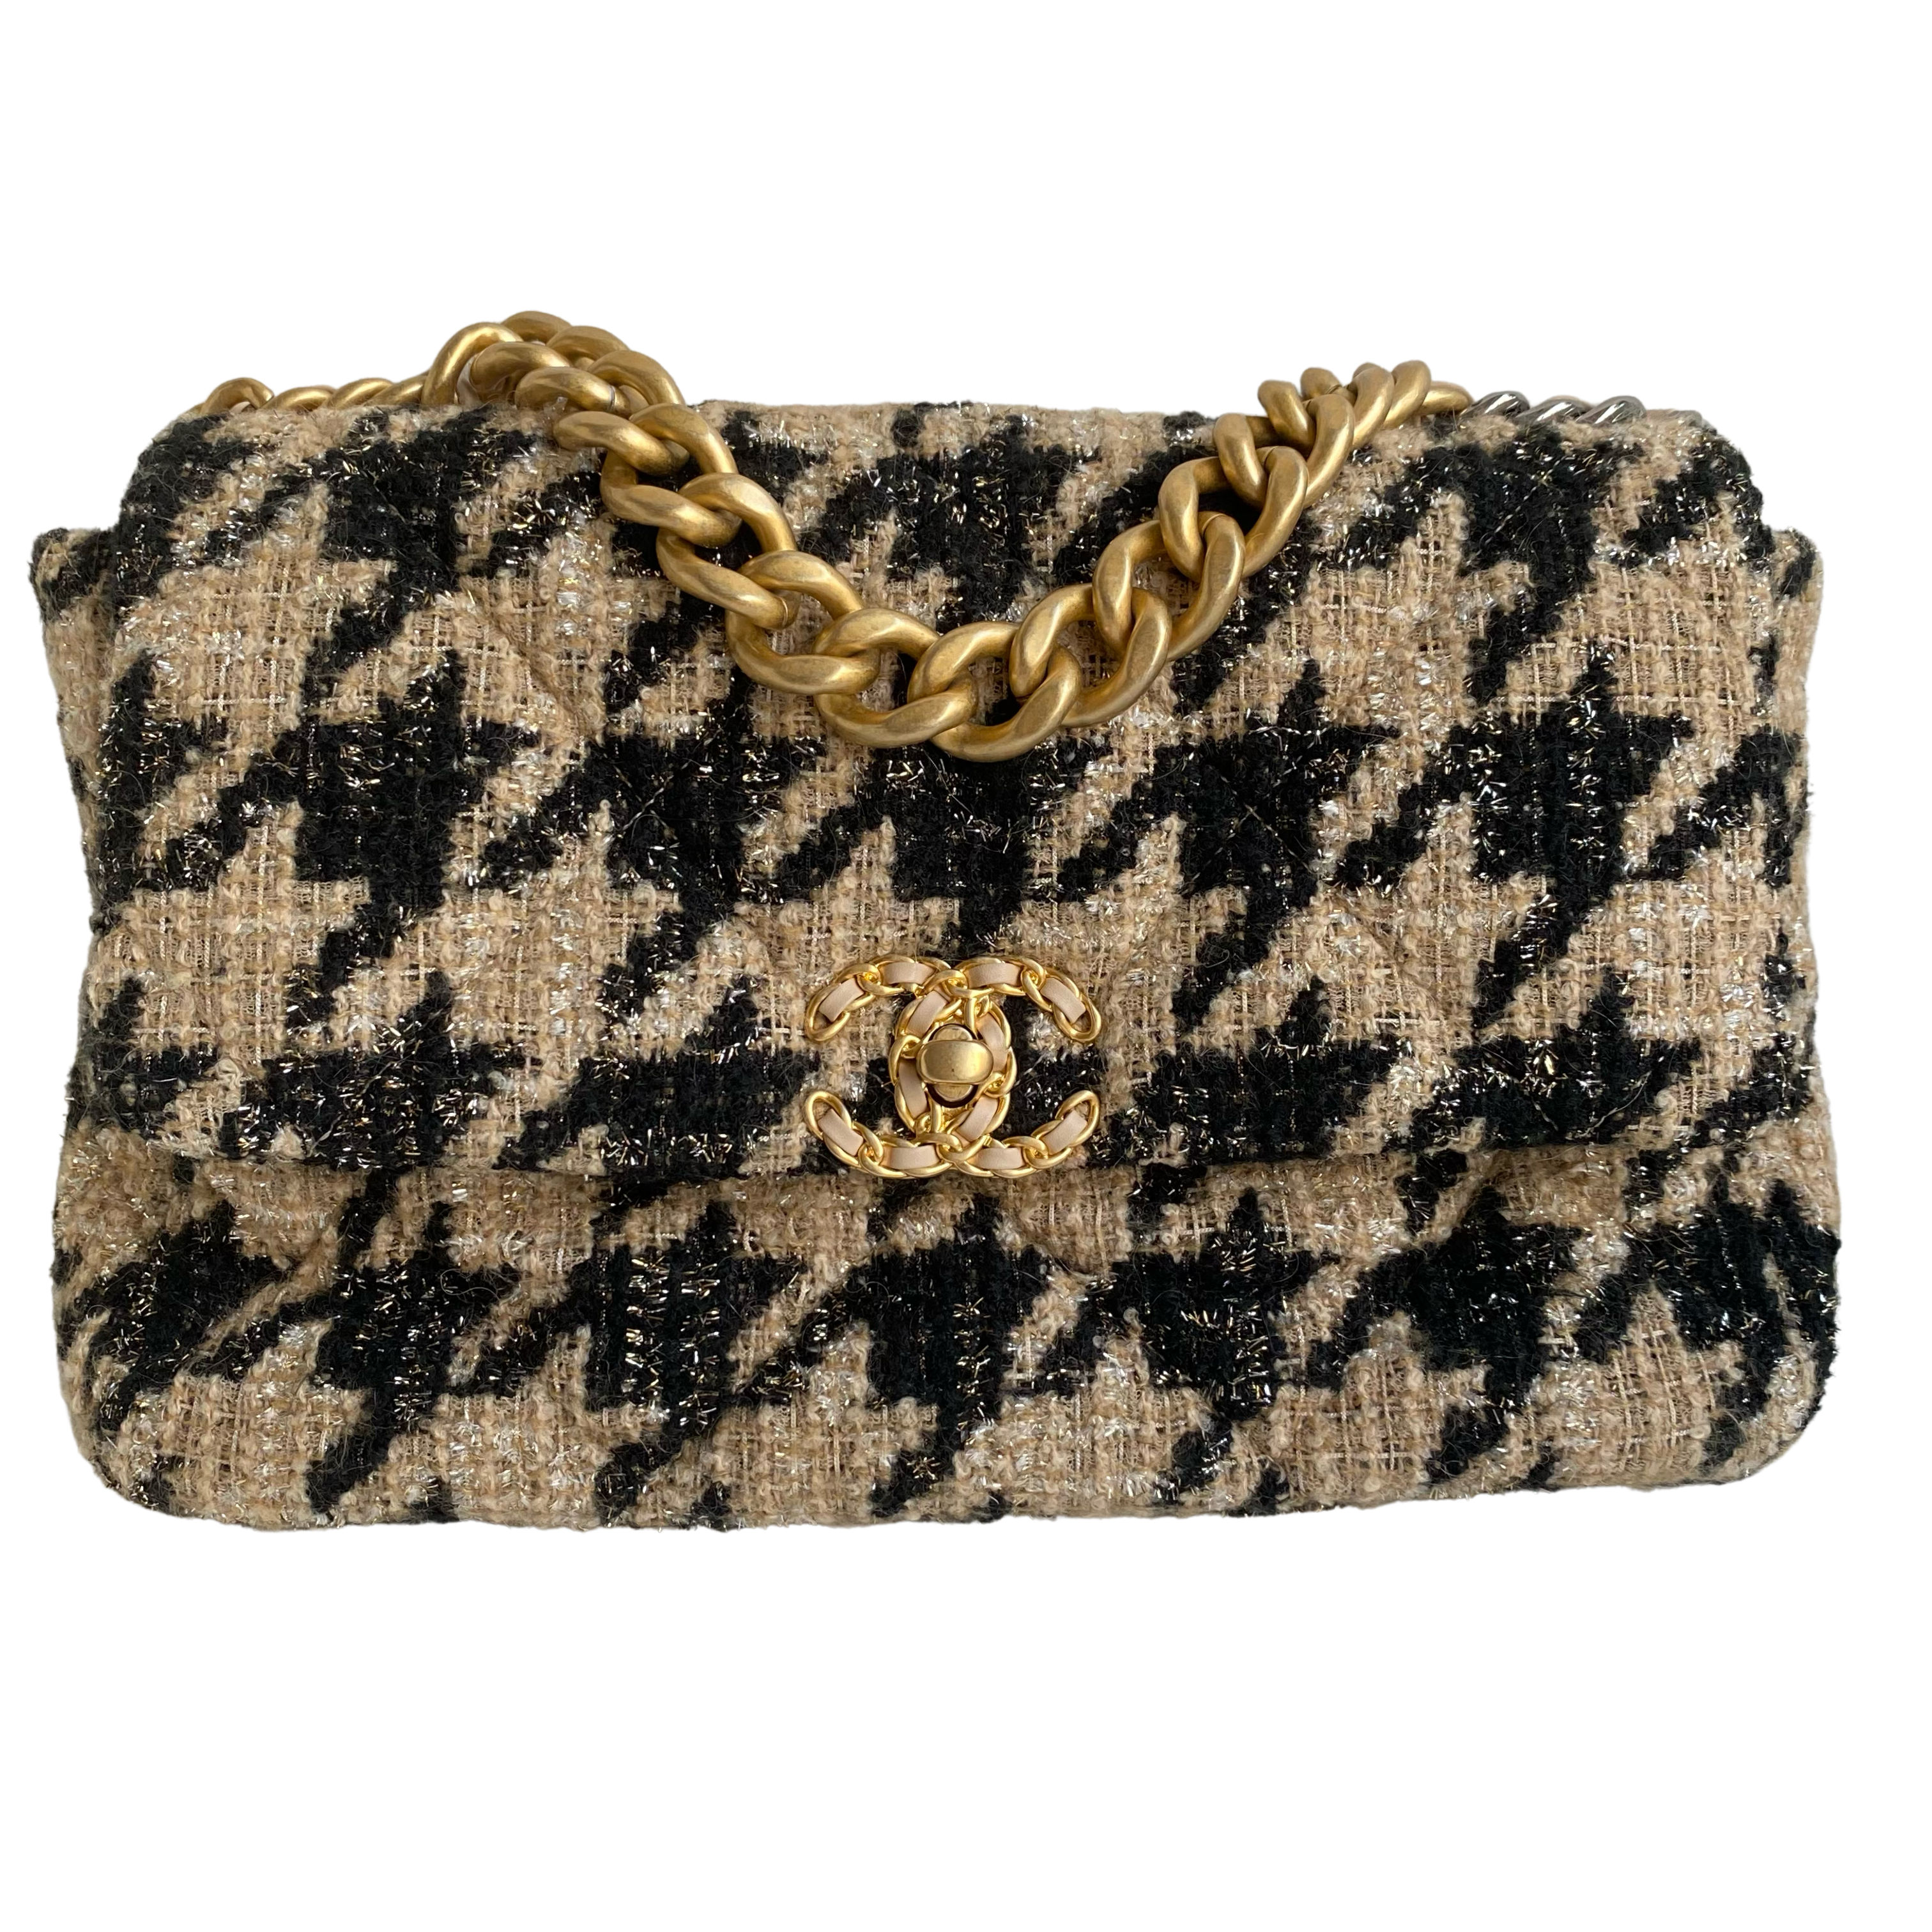 Chanel Beige, Black and Silver Houndstooth Tweed Maxi 19 Flap Brushed Gold and Ruthenium Hardware, 2019 (Very Good), Womens Handbag